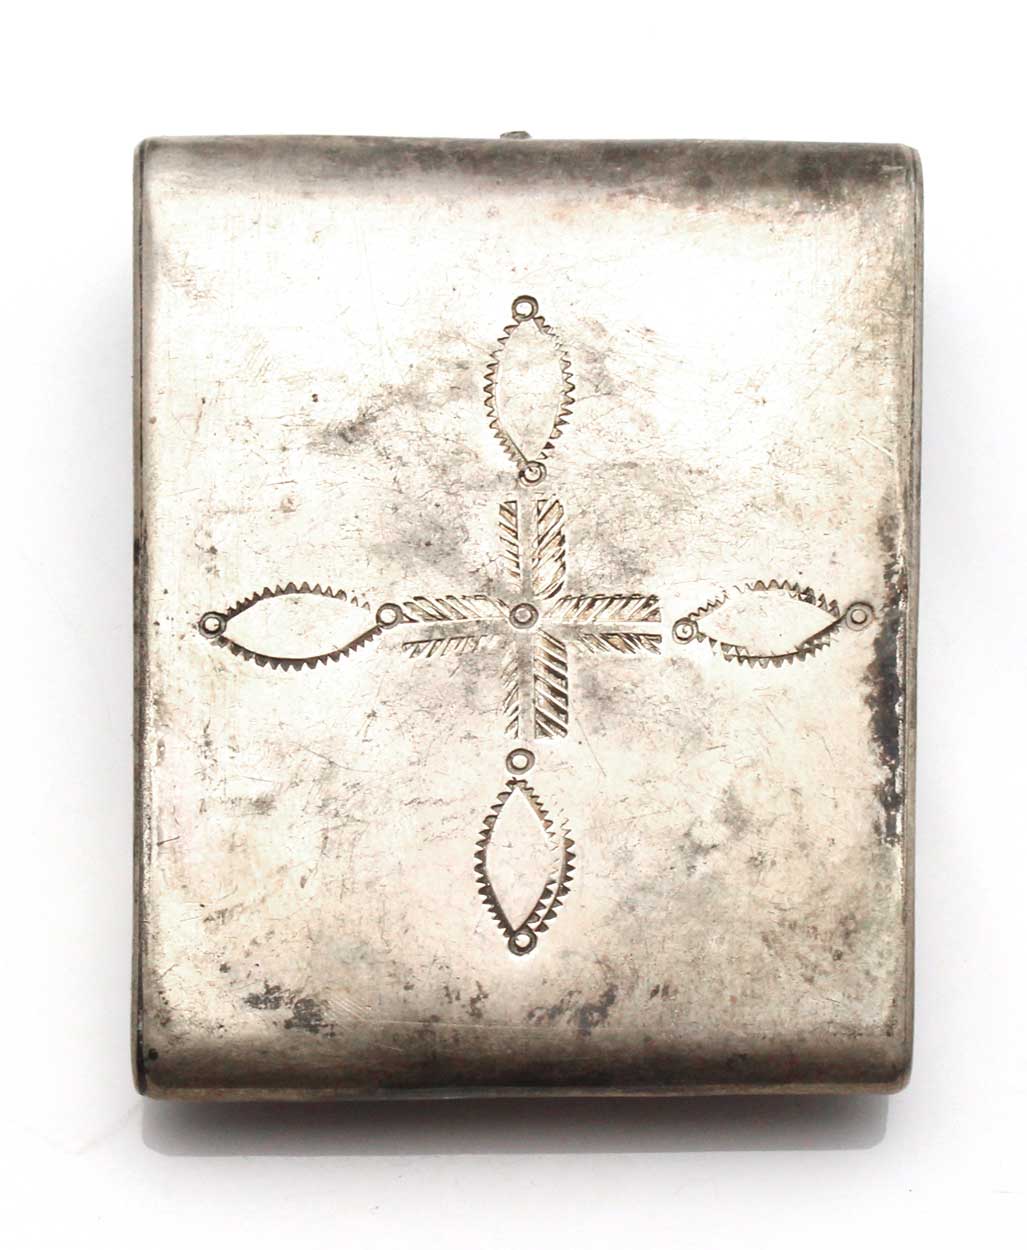 Stamped Silver Match Book Cover